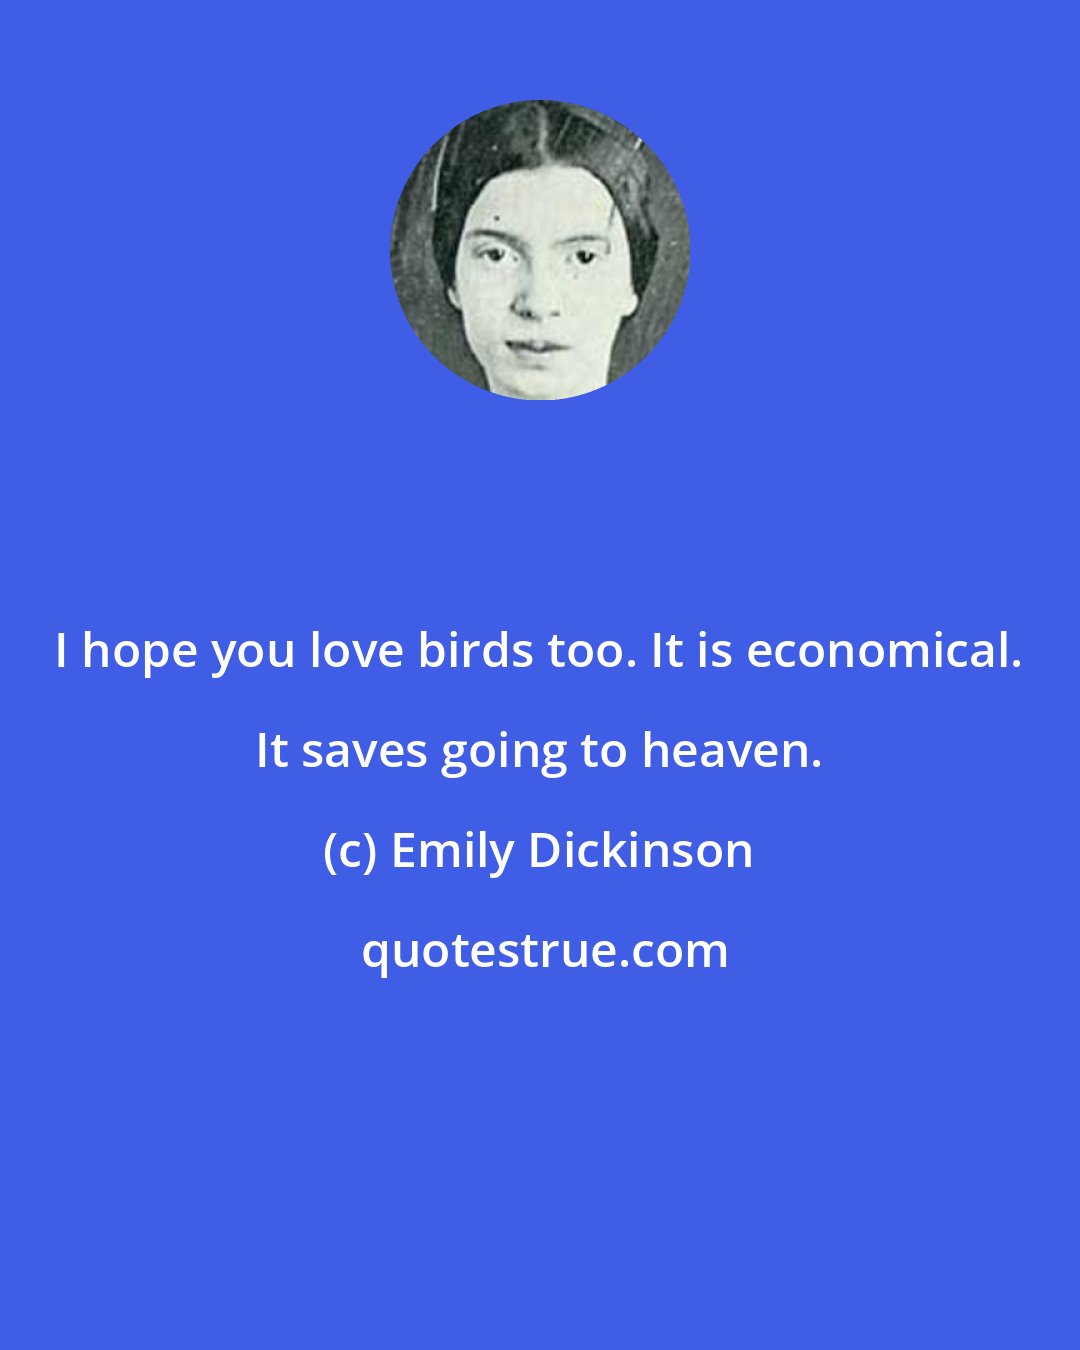 Emily Dickinson: I hope you love birds too. It is economical. It saves going to heaven.